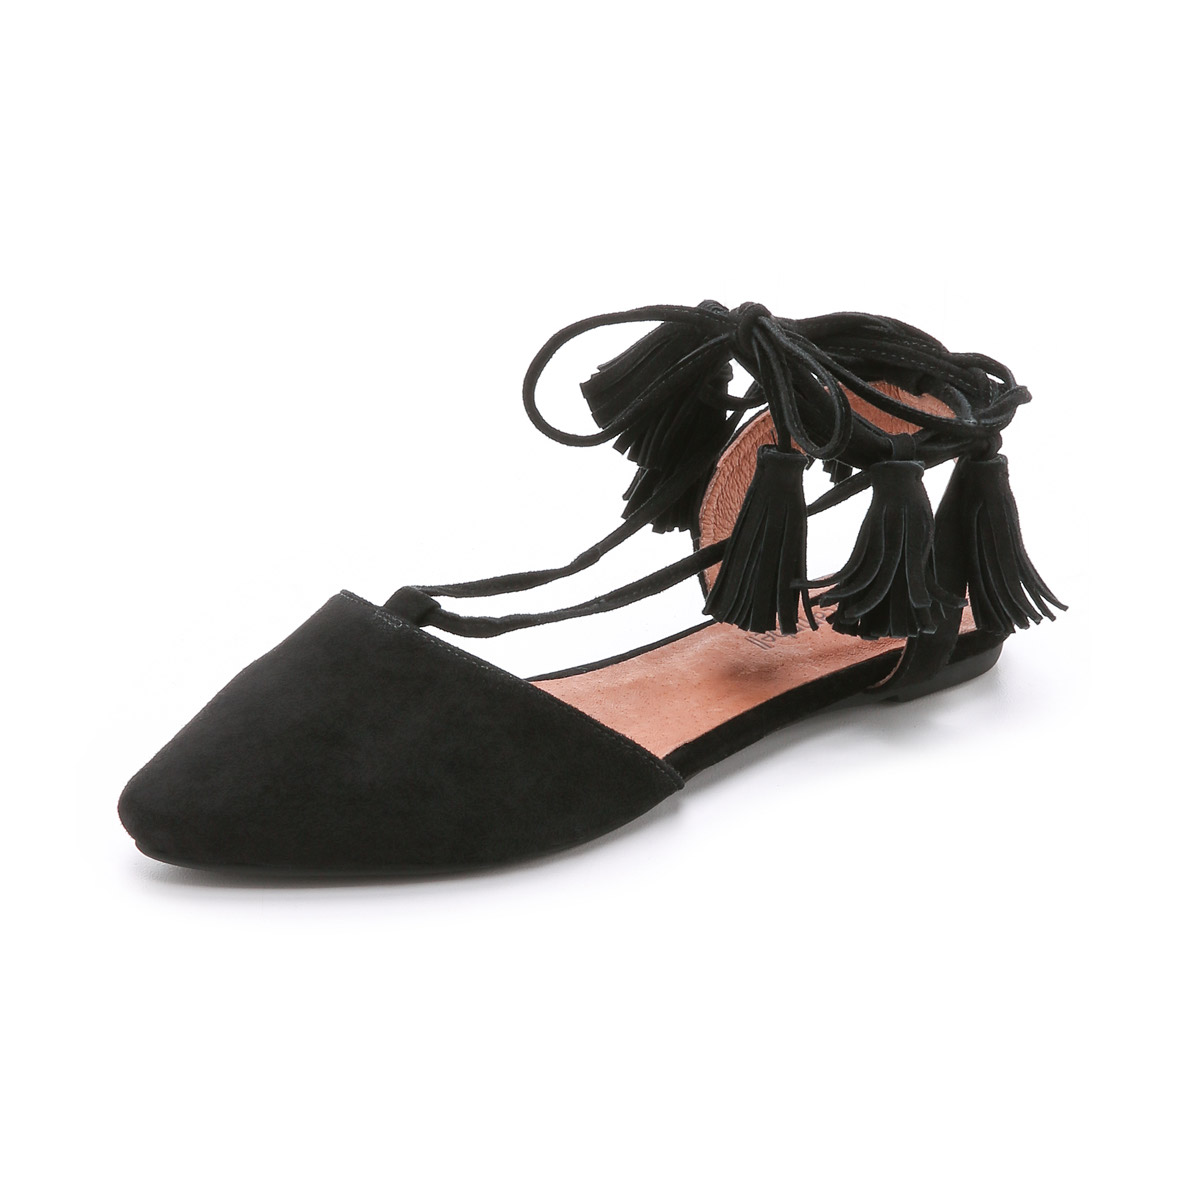 Amour Suede Flats